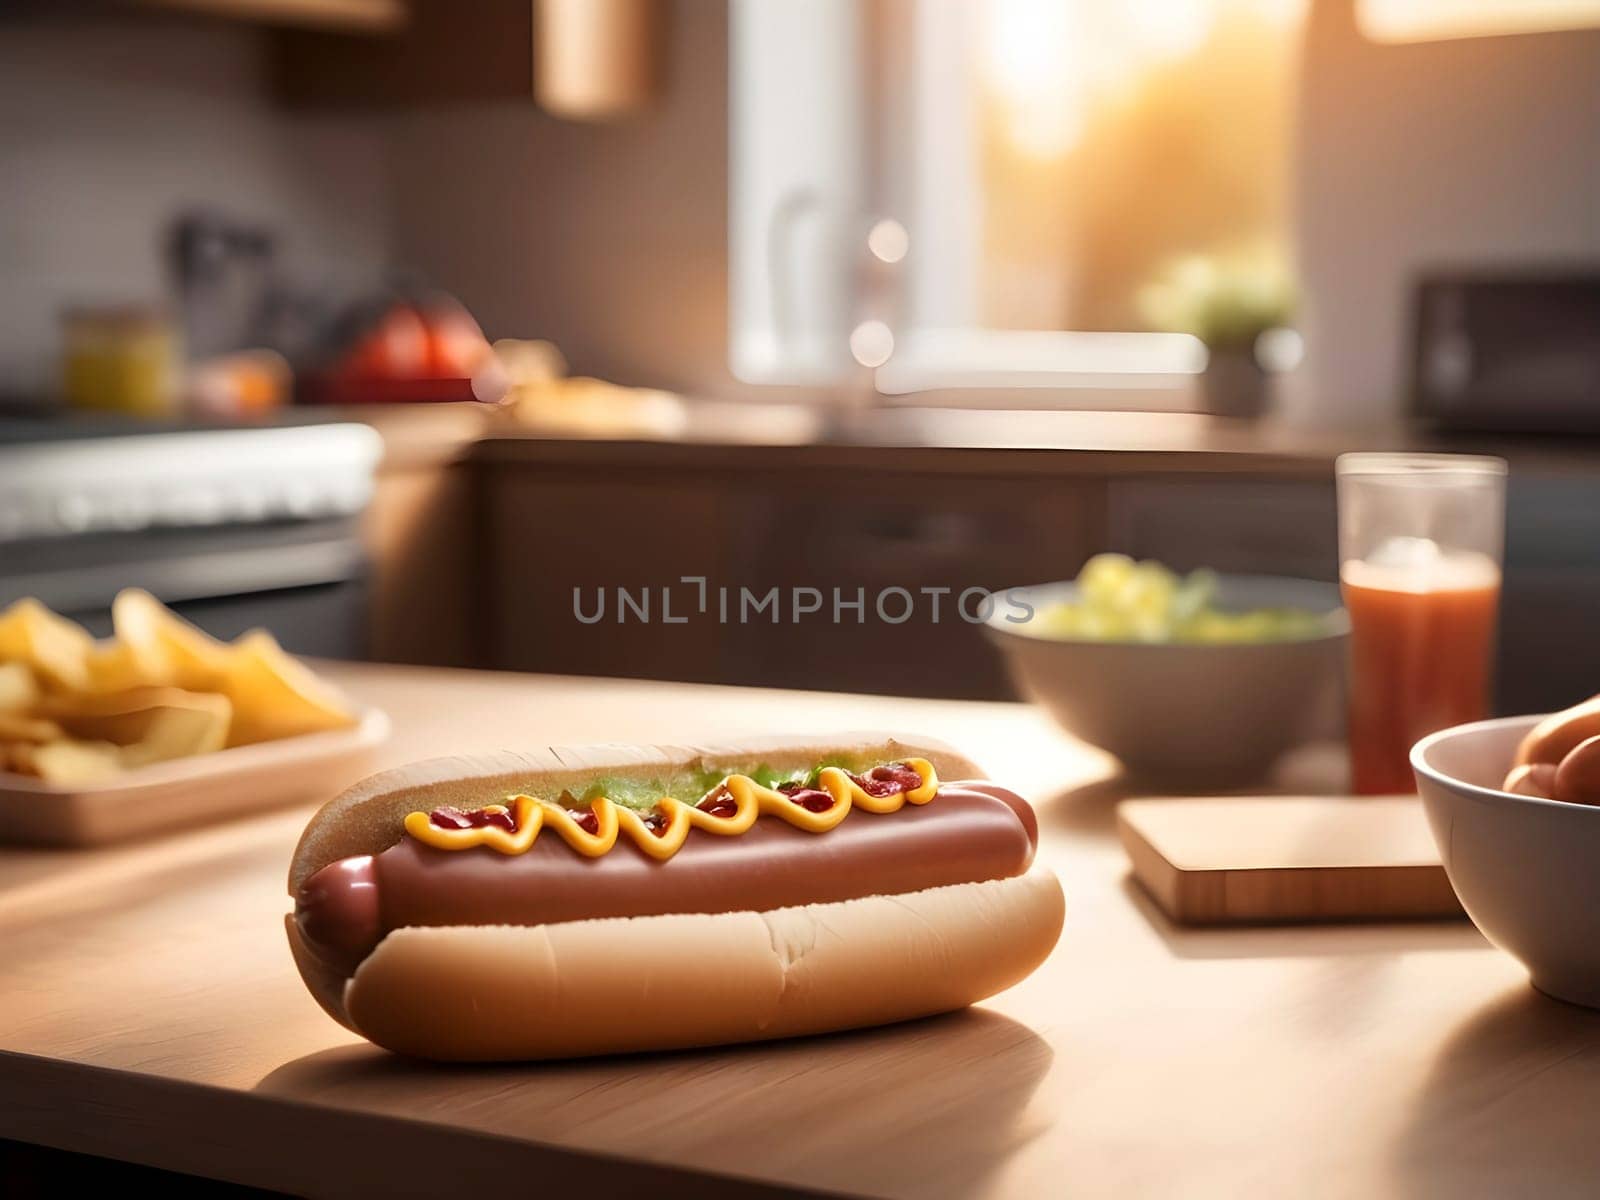 Kitchen Comfort: Hot Dog Spotlight in the Soft Glow of Afternoon Illumination.